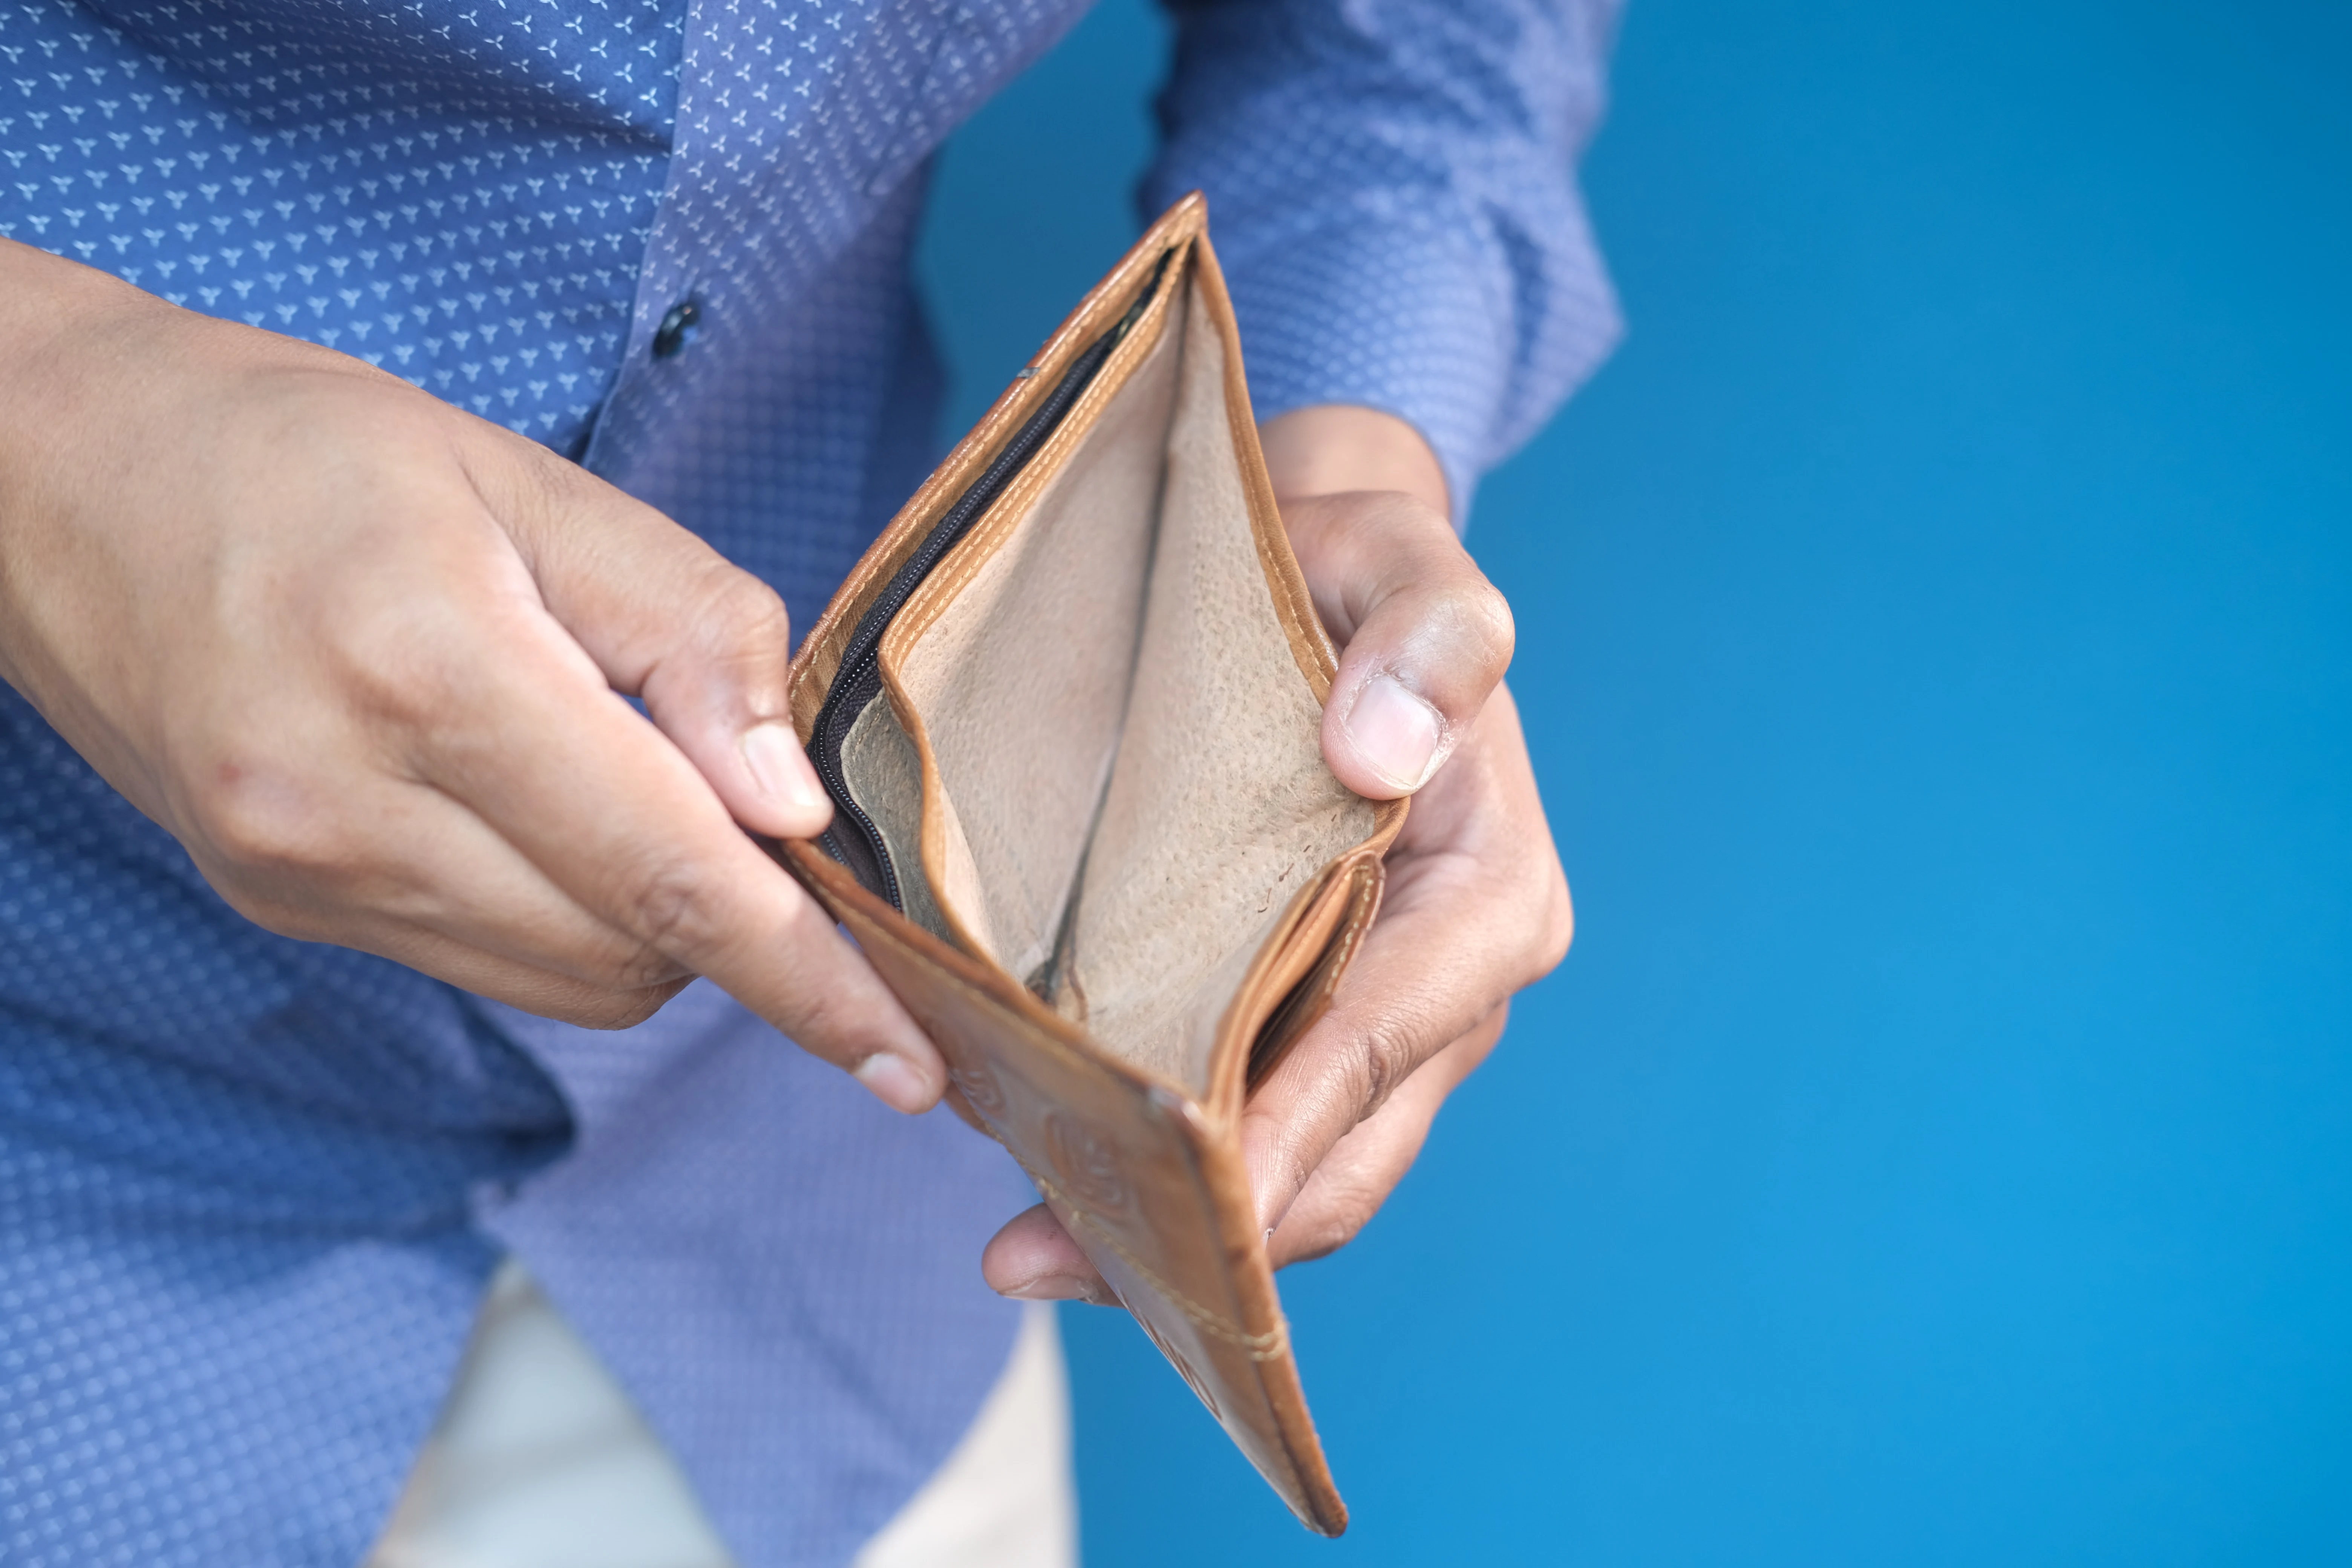 Closeup of two hands holding open a brown leather wallet. There is no money in the wallet. The person holding the wallet is wearing a blue button down shirt and cream colored pants. They are standing in front of a blue wall. Their face is not in the photo.